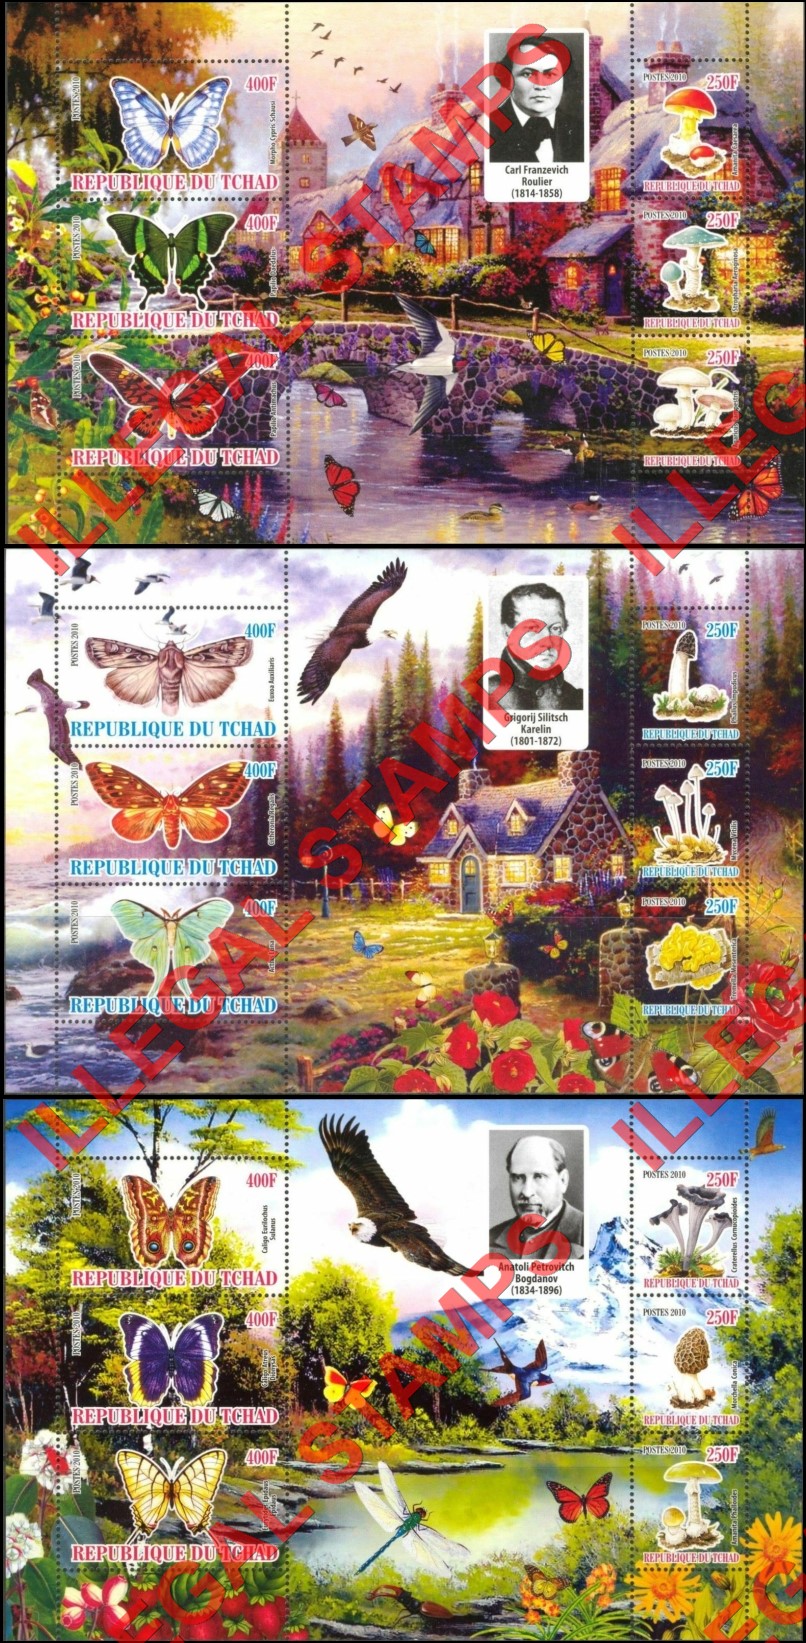 Chad 2010 Butterflies and Mushrooms Illegal Stamps in Souvenir Sheets of 6 (Part 6)